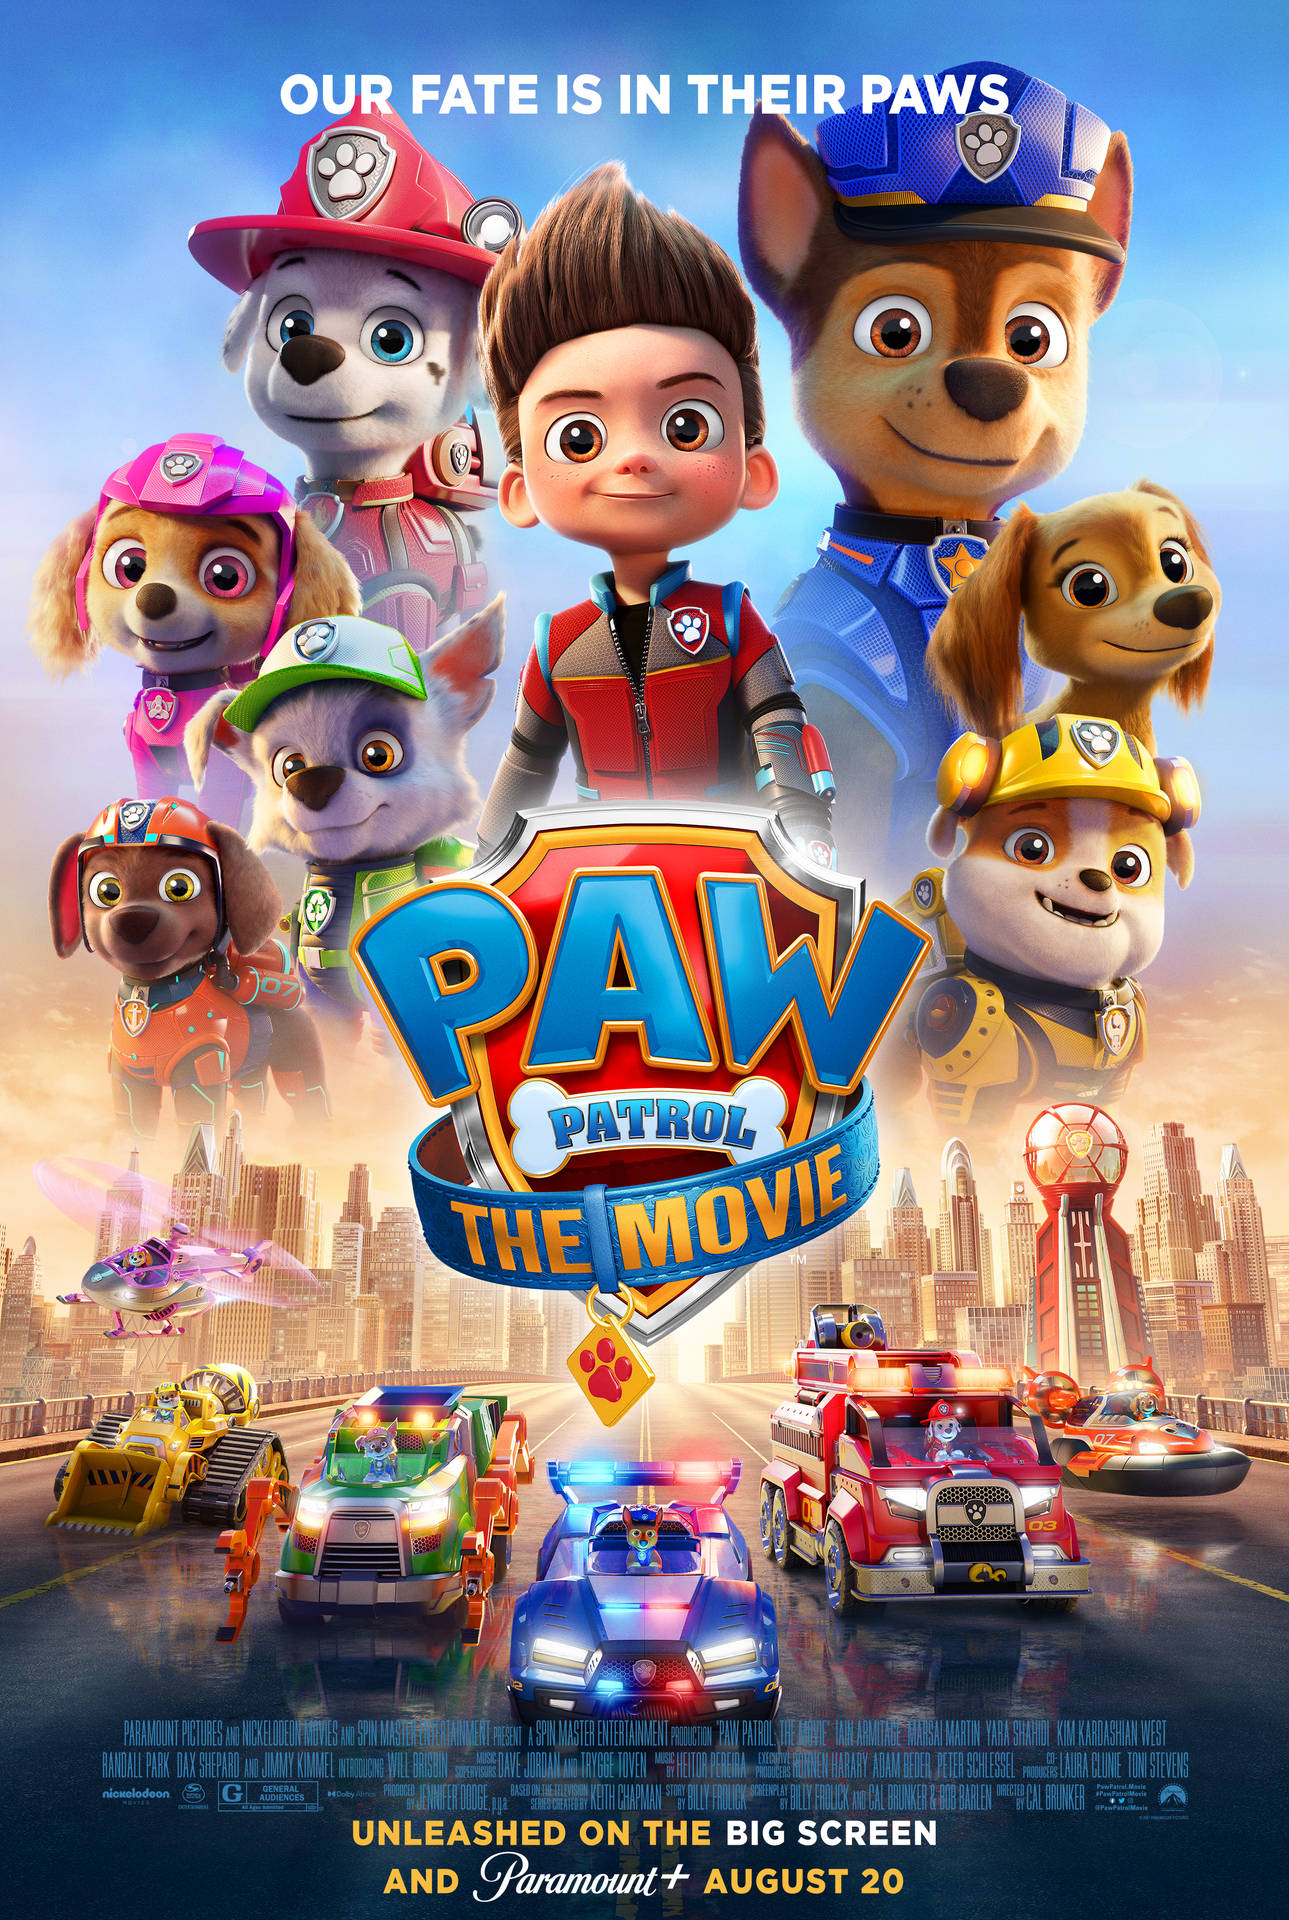 Cool Paw Patrol The Movie Poster Wallpaper